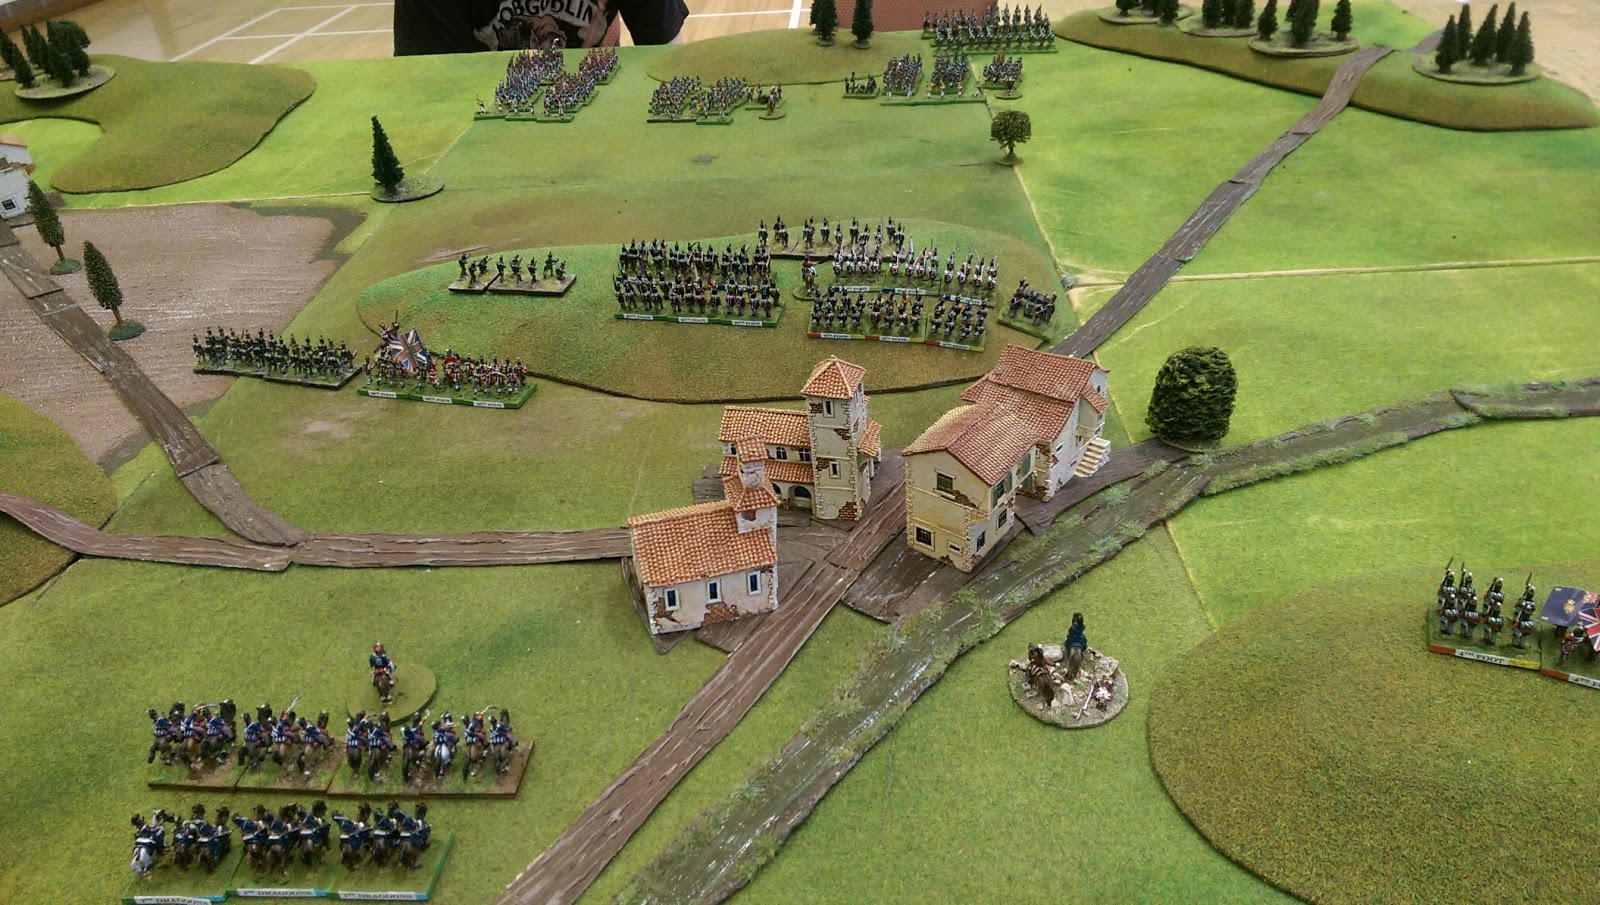 Vimeiro and the starting positions